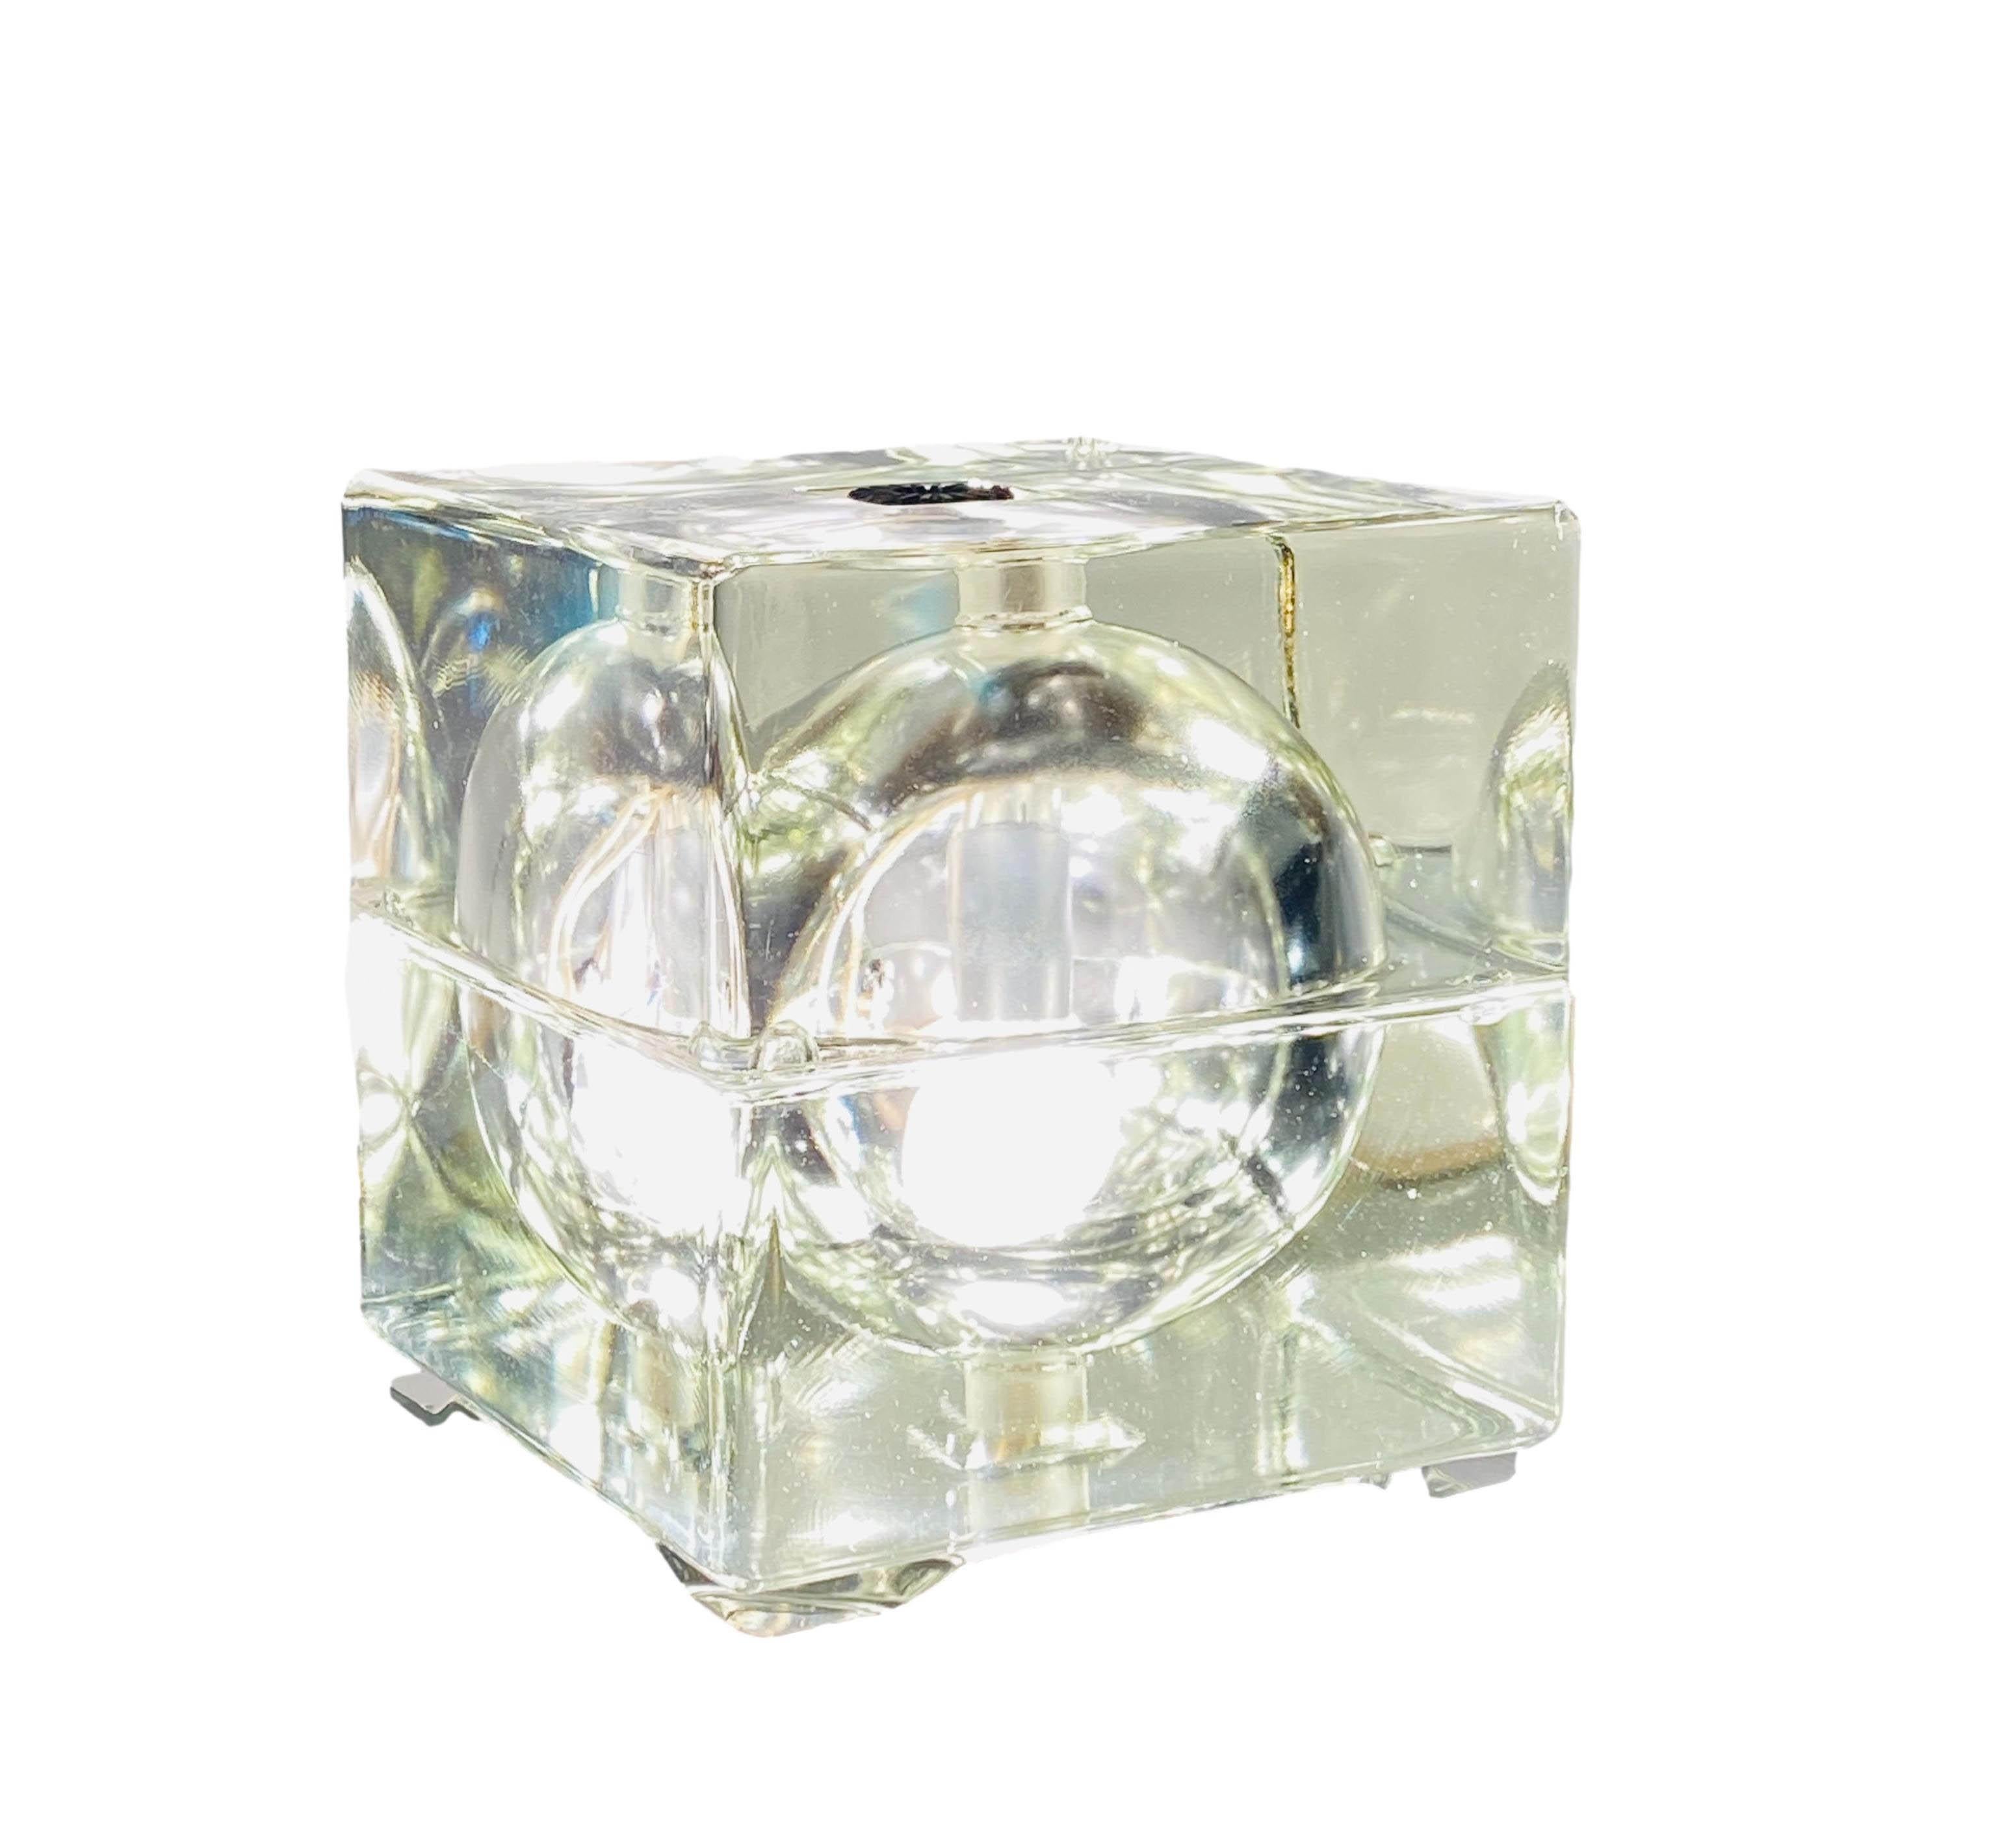 Cubosfera table lamp by Alessandro Mendini for Fidenza Vetraria, Italy 1968. Made of solid transparent glass with metal details. The upper and lower parts together form a cube with a sculpted globe. The lamp is equipped with two illuminating bodies